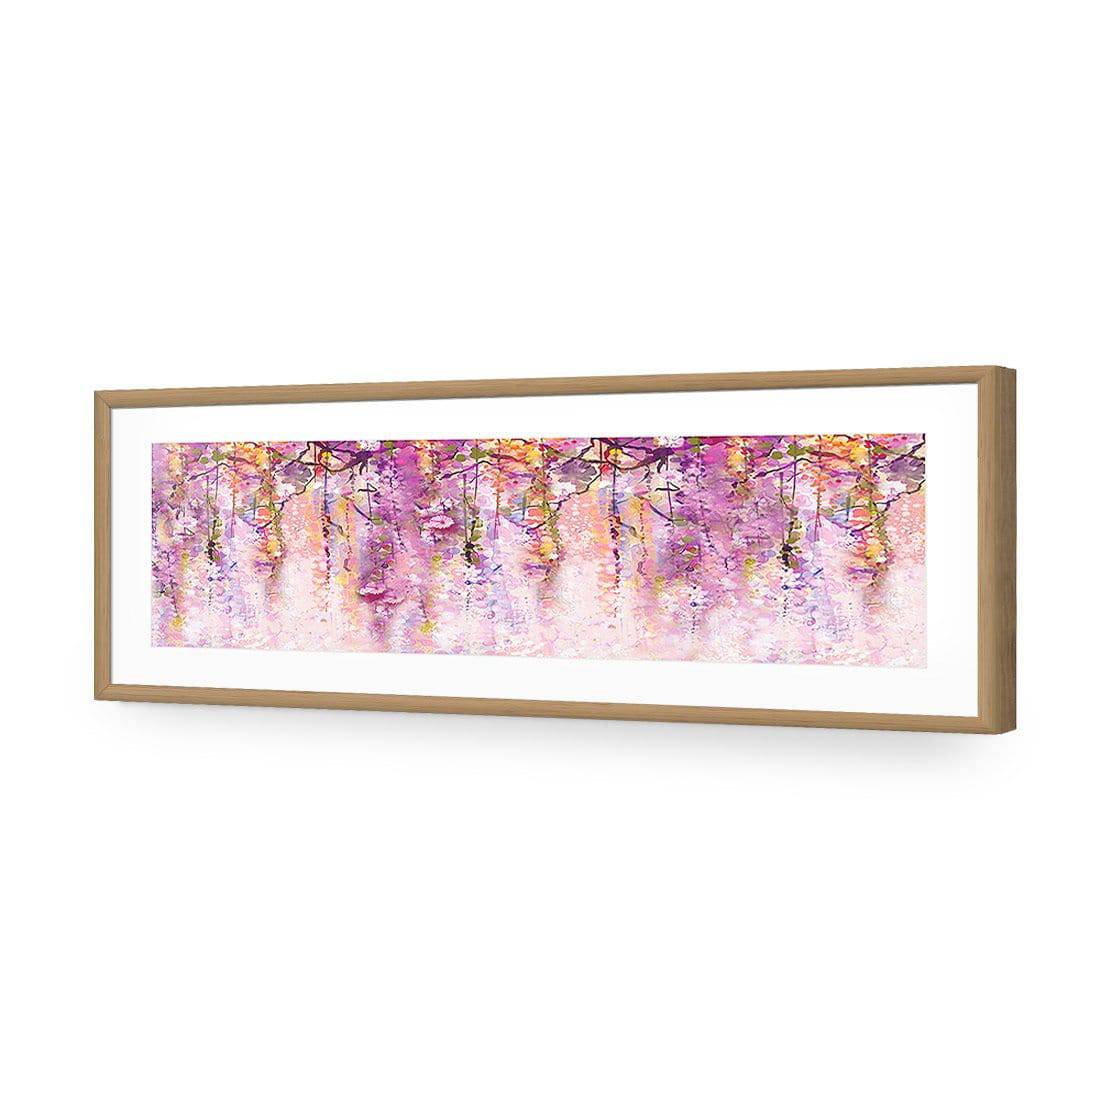 Lilac Dream, Long-Acrylic-Wall Art Design-With Border-Acrylic - Oak Frame-60x20cm-Wall Art Designs